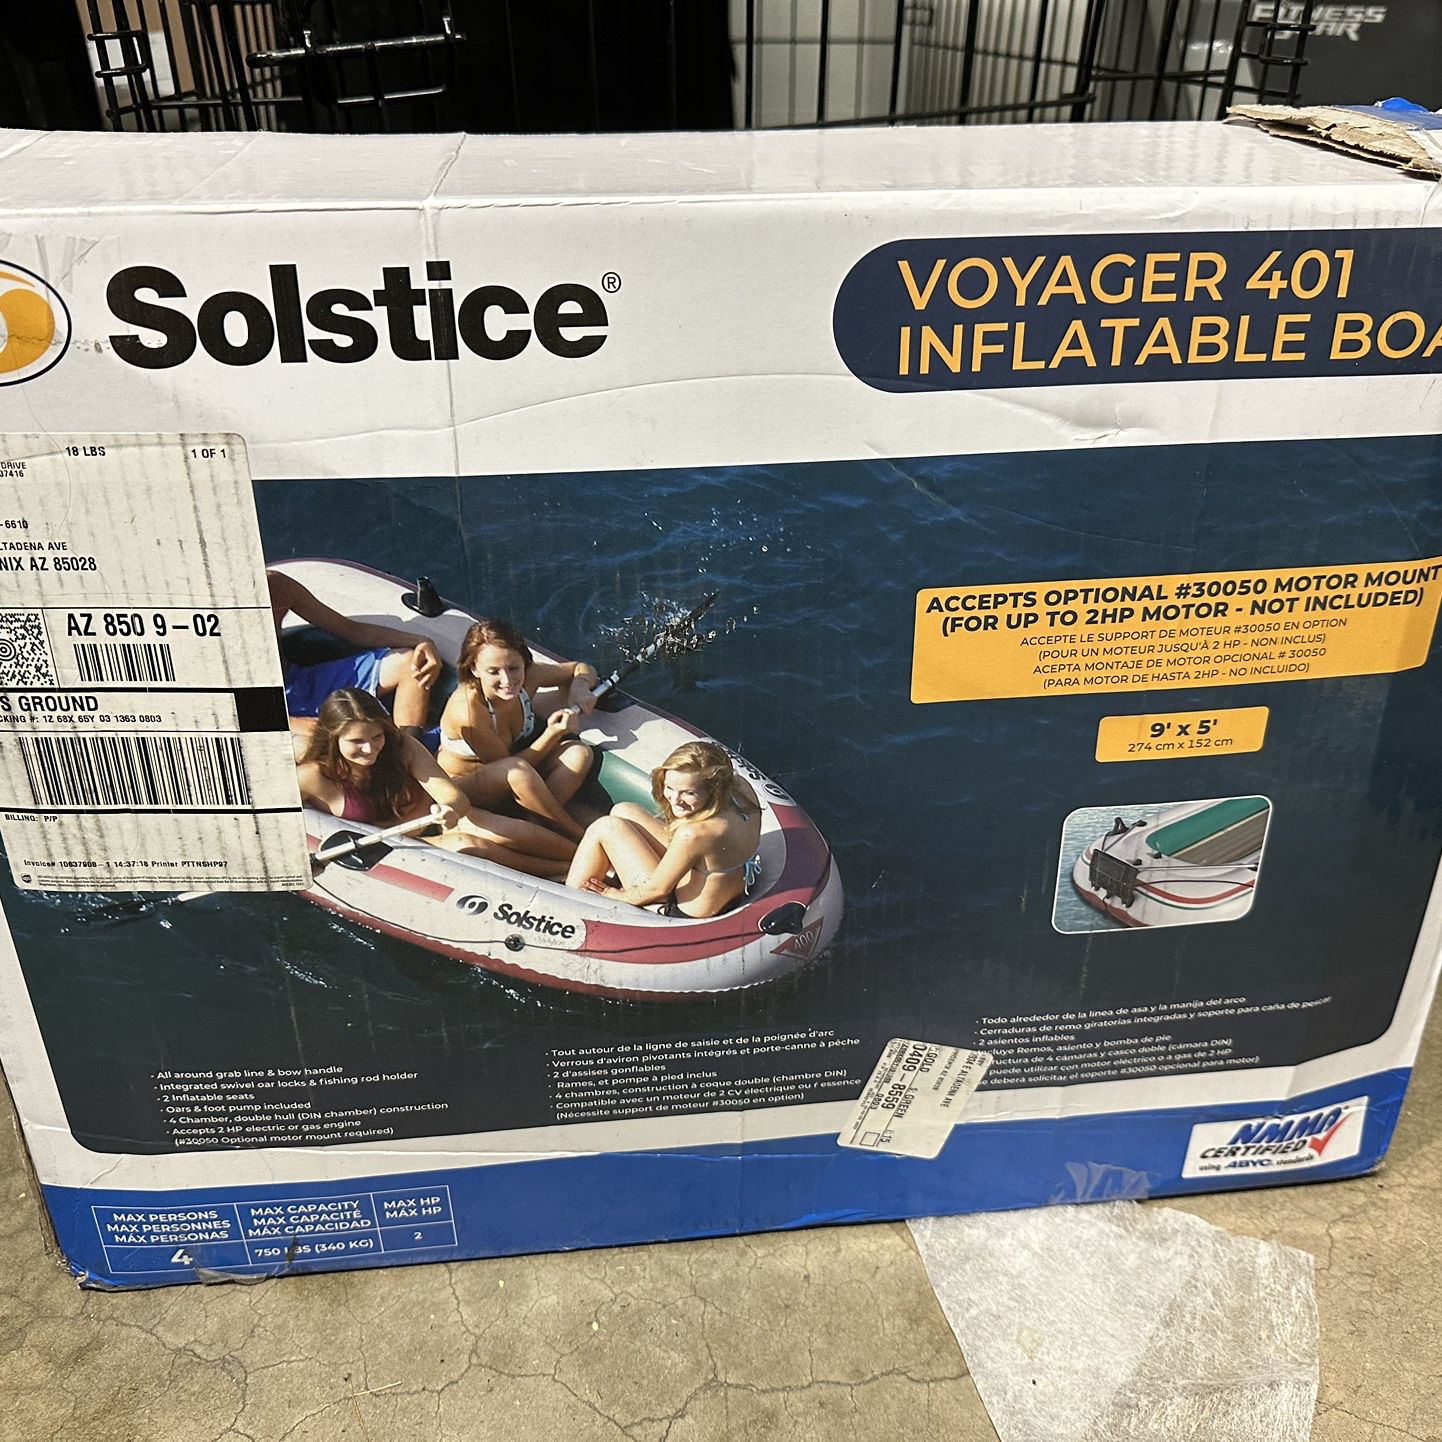 Solstice Voyager Inflatable Boat